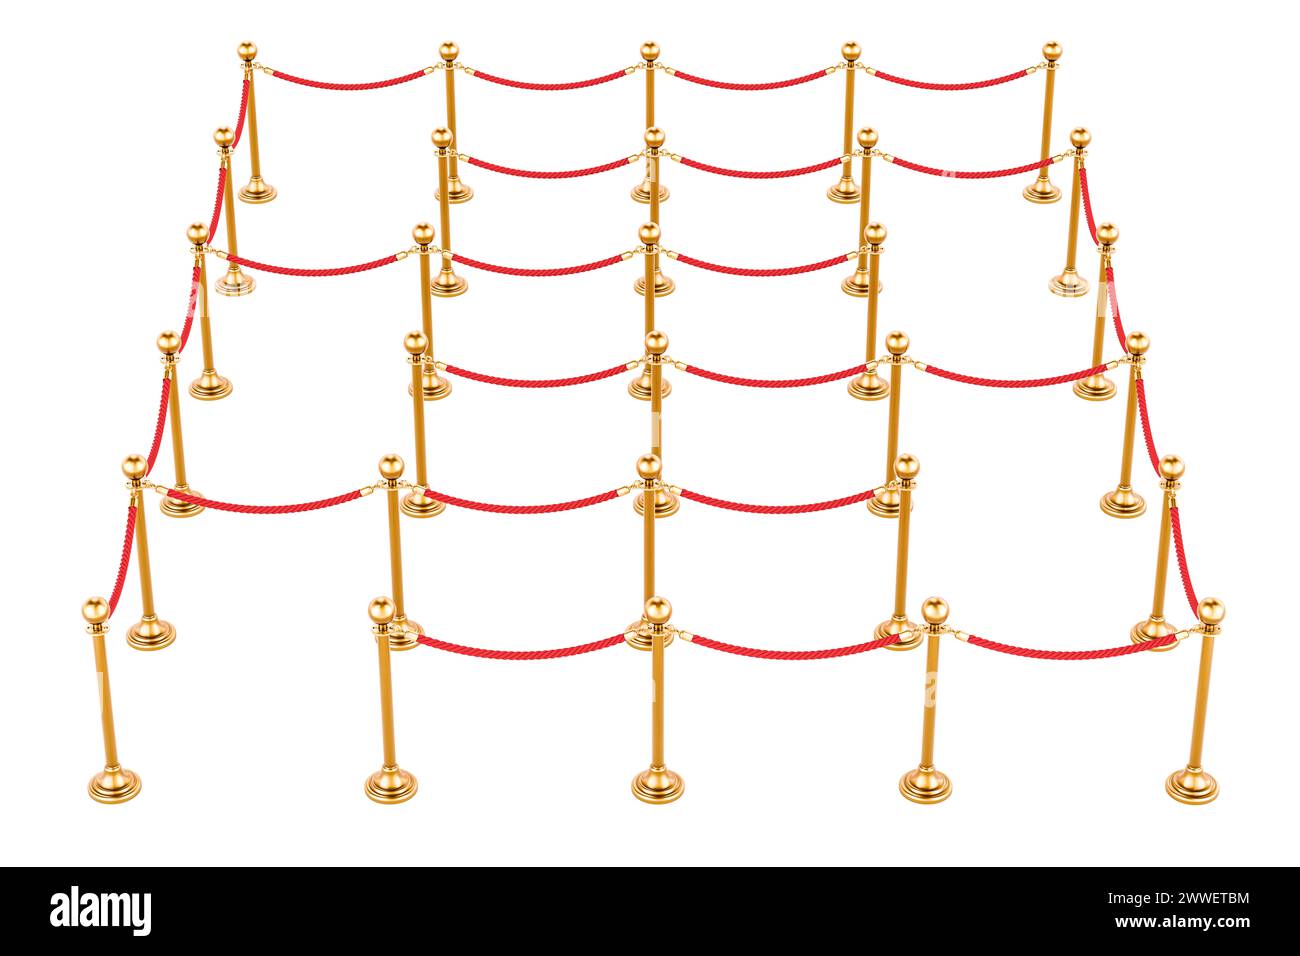 Premium Crowd Control Barriers, red roped line. 3D rendering isolated on white background Stock Photo